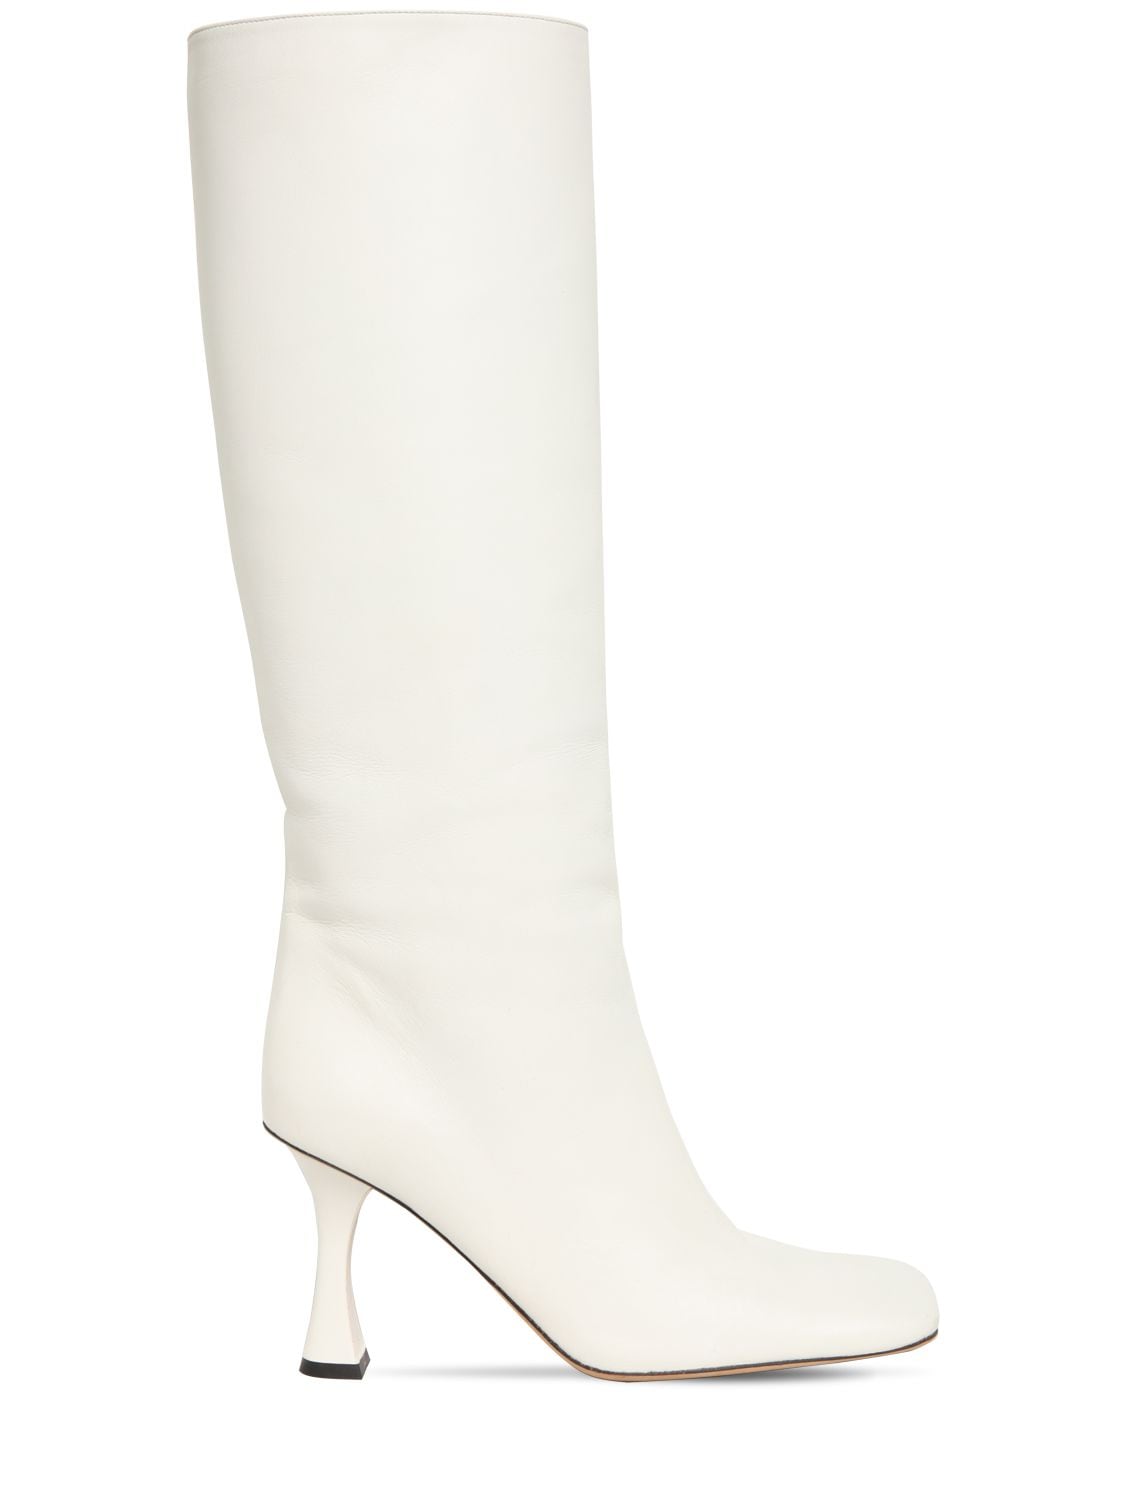 Proenza Schouler - 90mm leather tall boots - White | Luisaviaroma